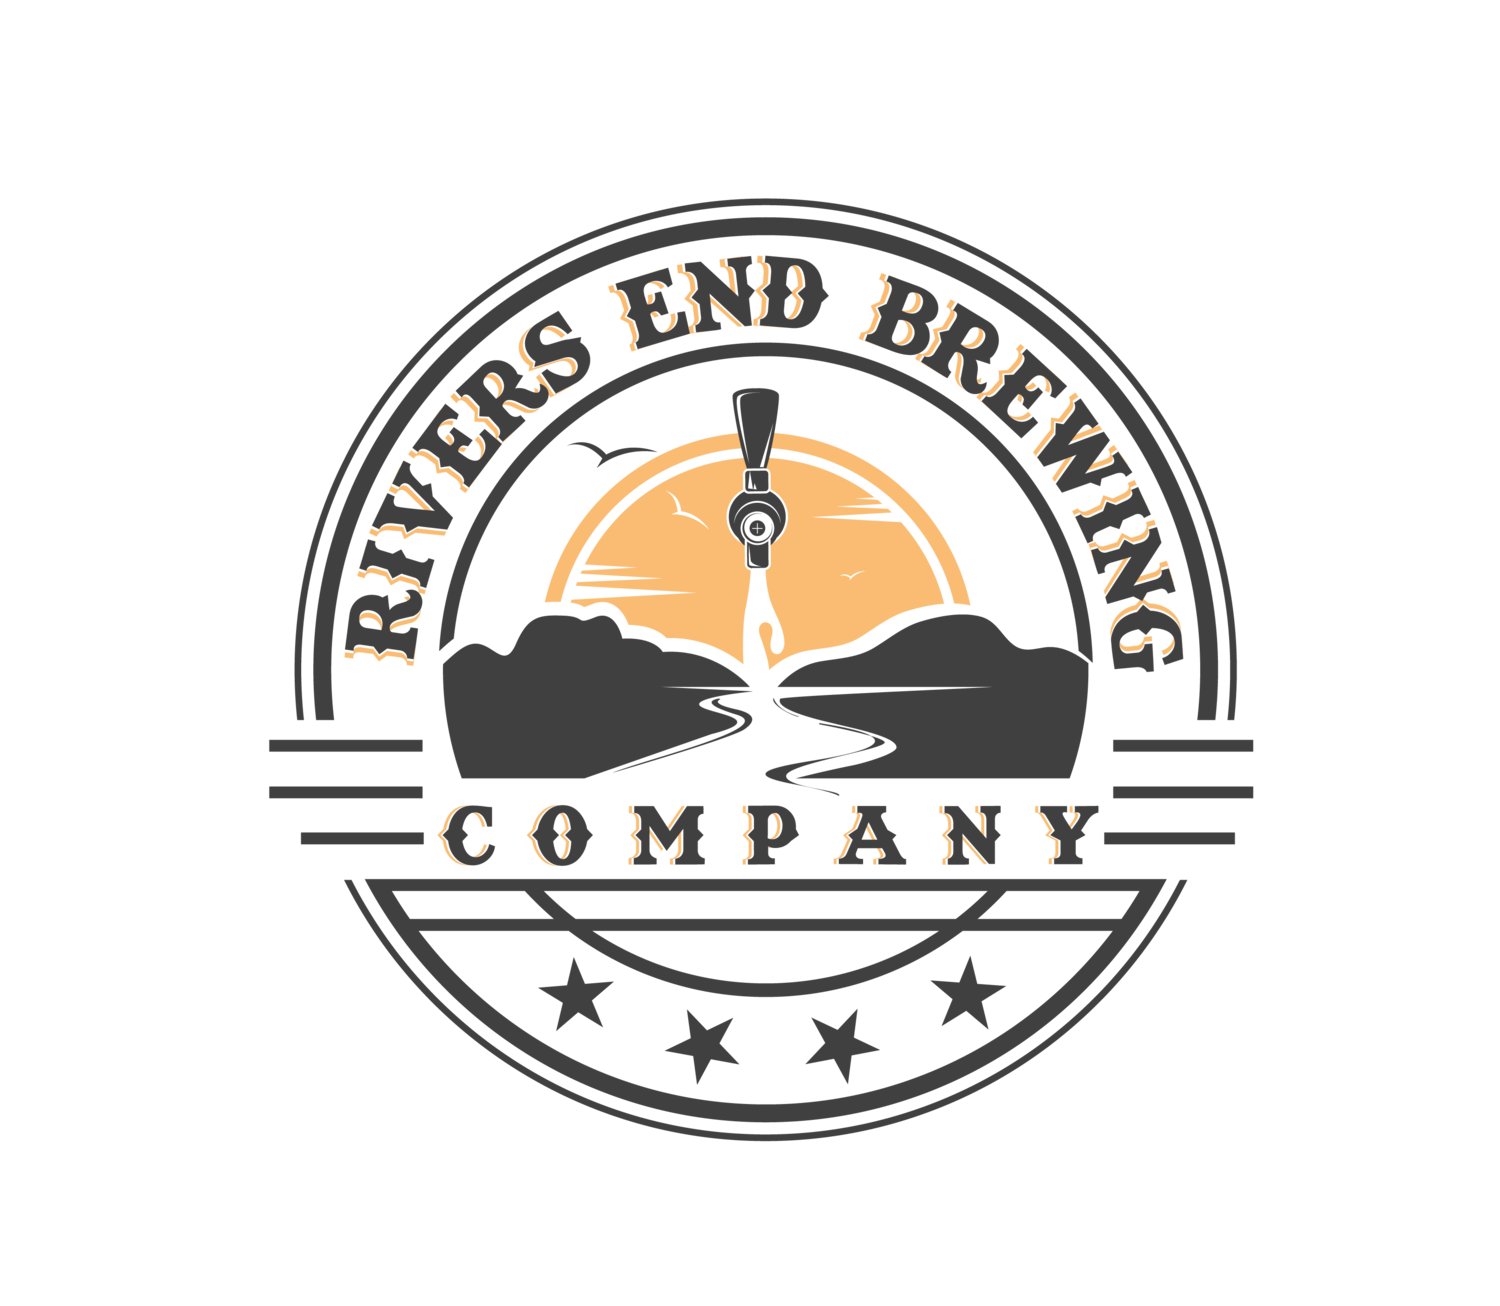 Rivers End Brewing Company